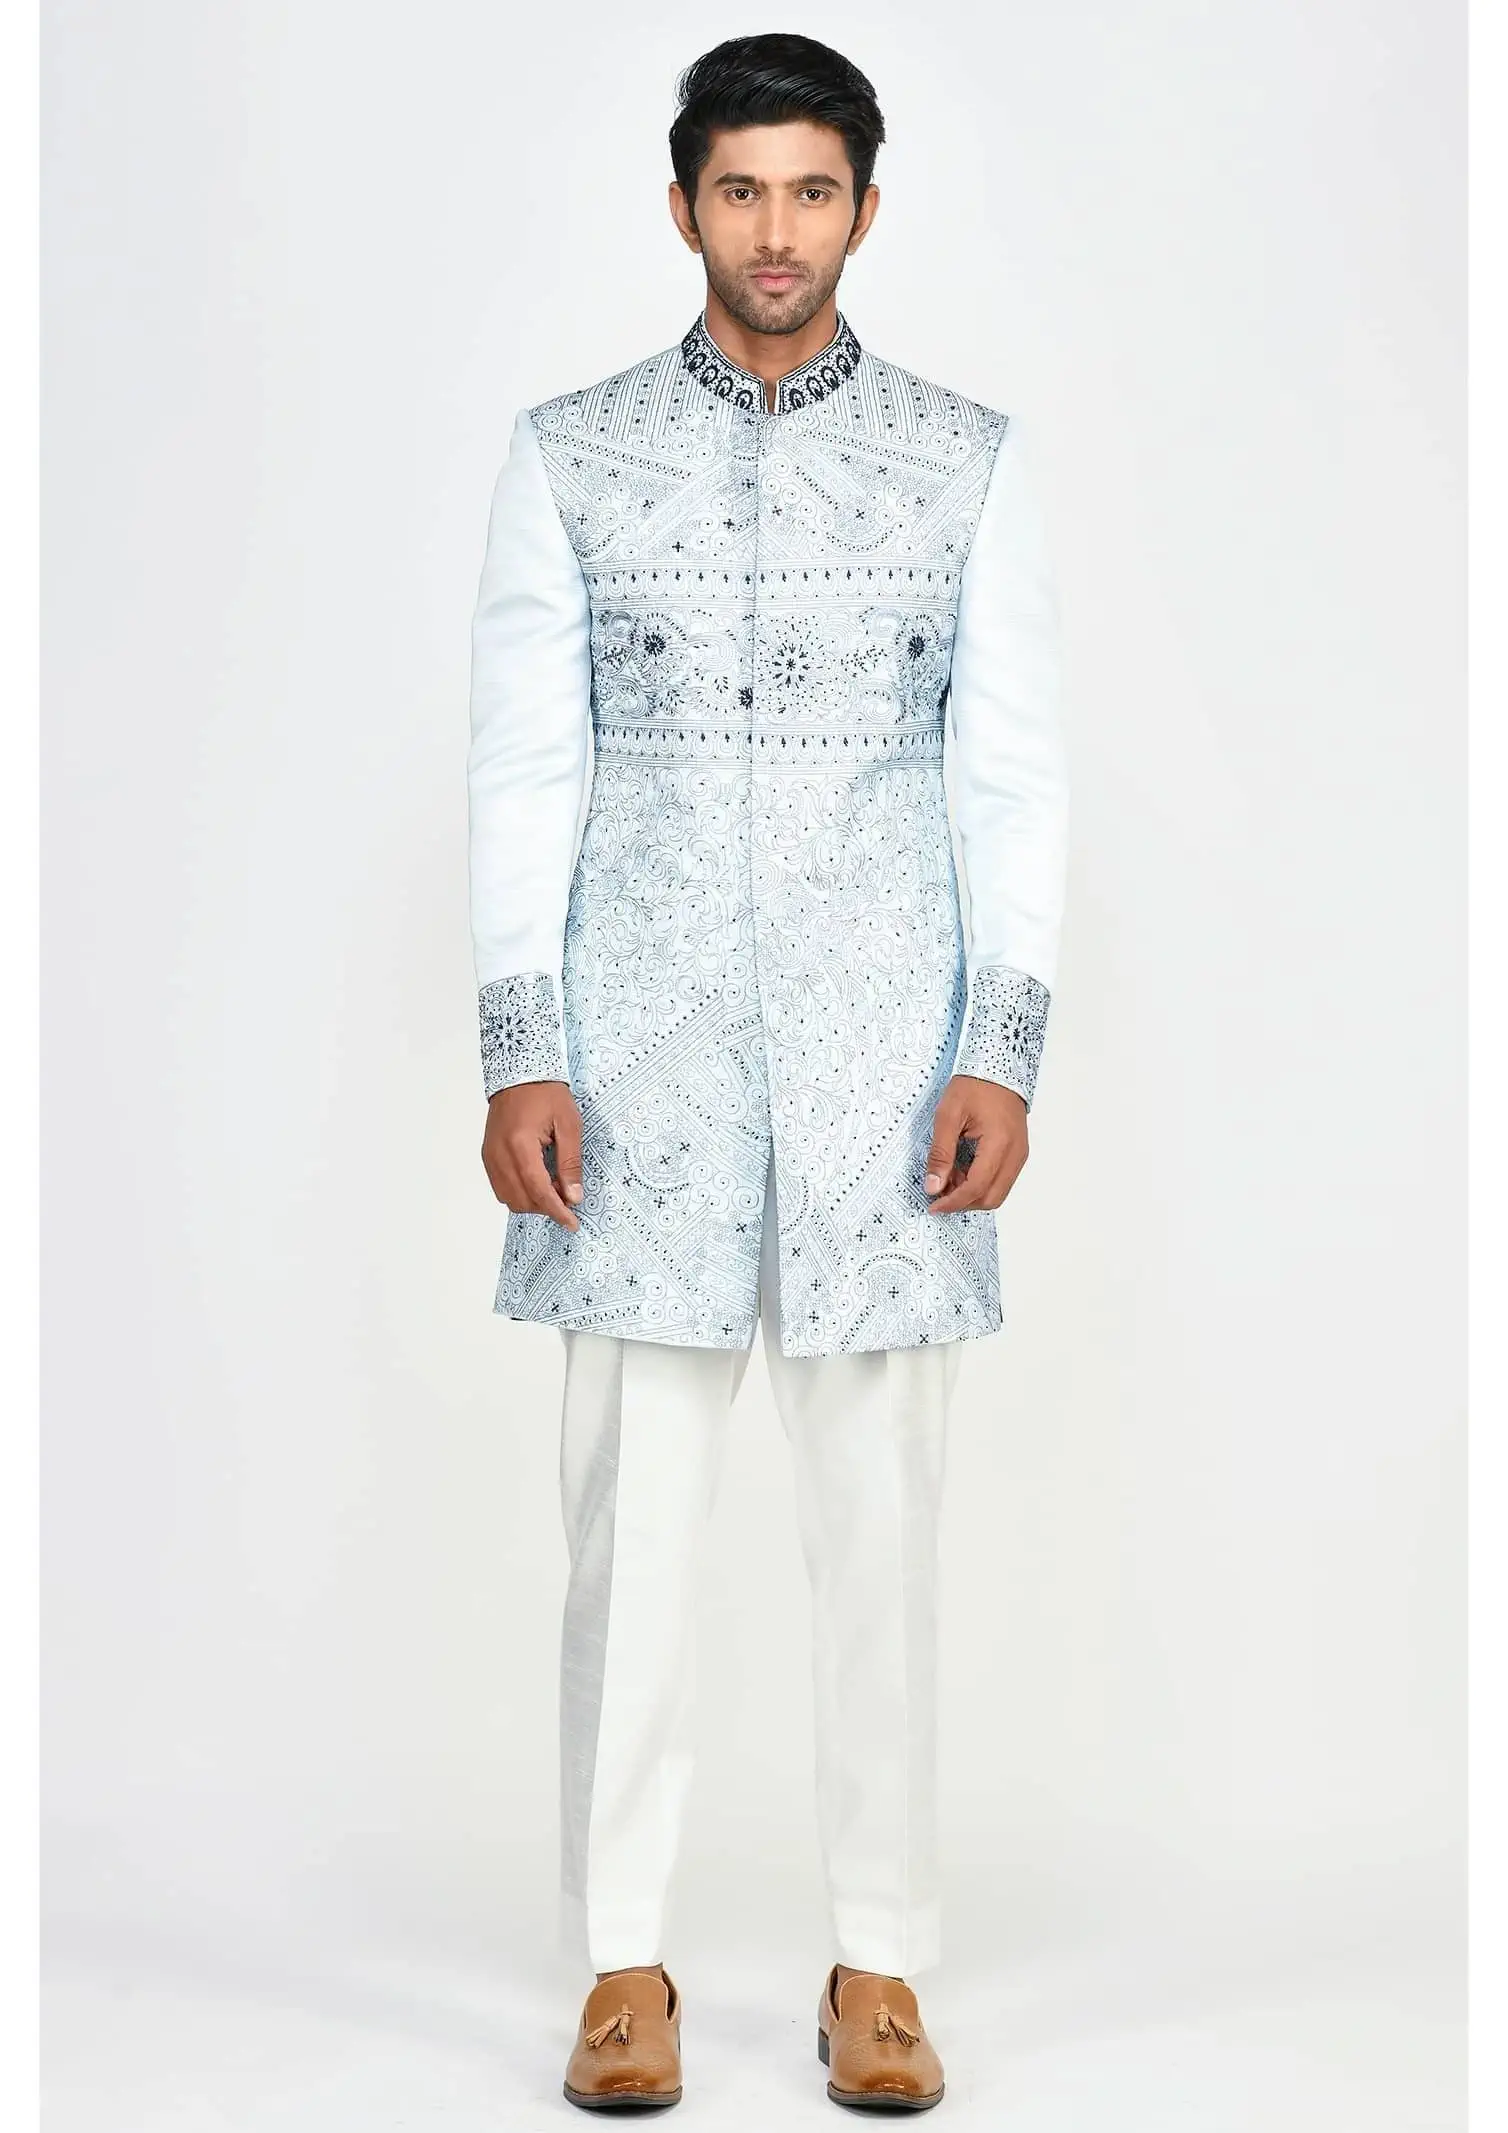 34 Galabandh Suits for Your Rendezvous with Royalty